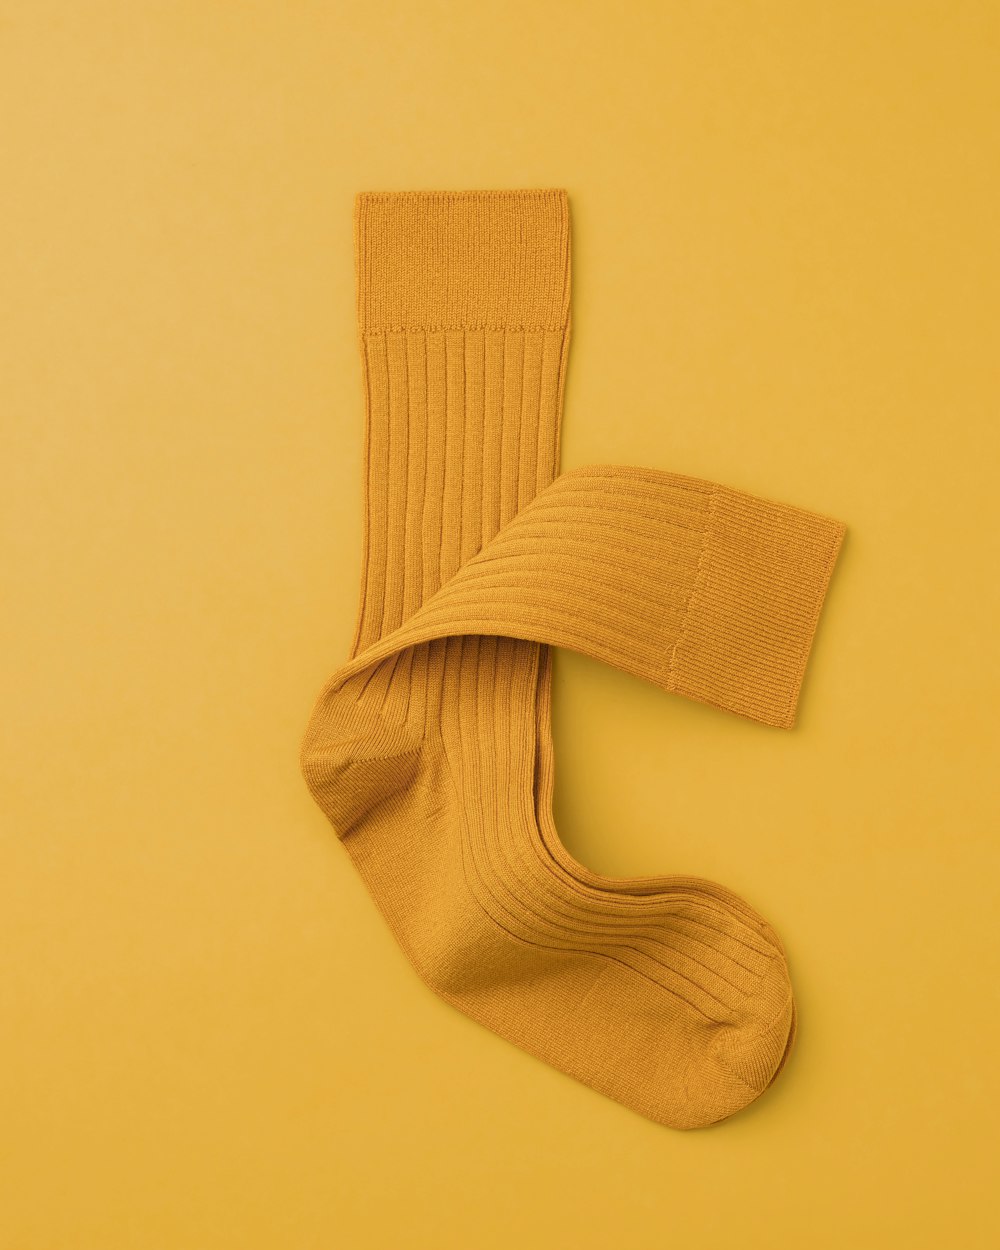 a pair of socks laying on top of a yellow surface